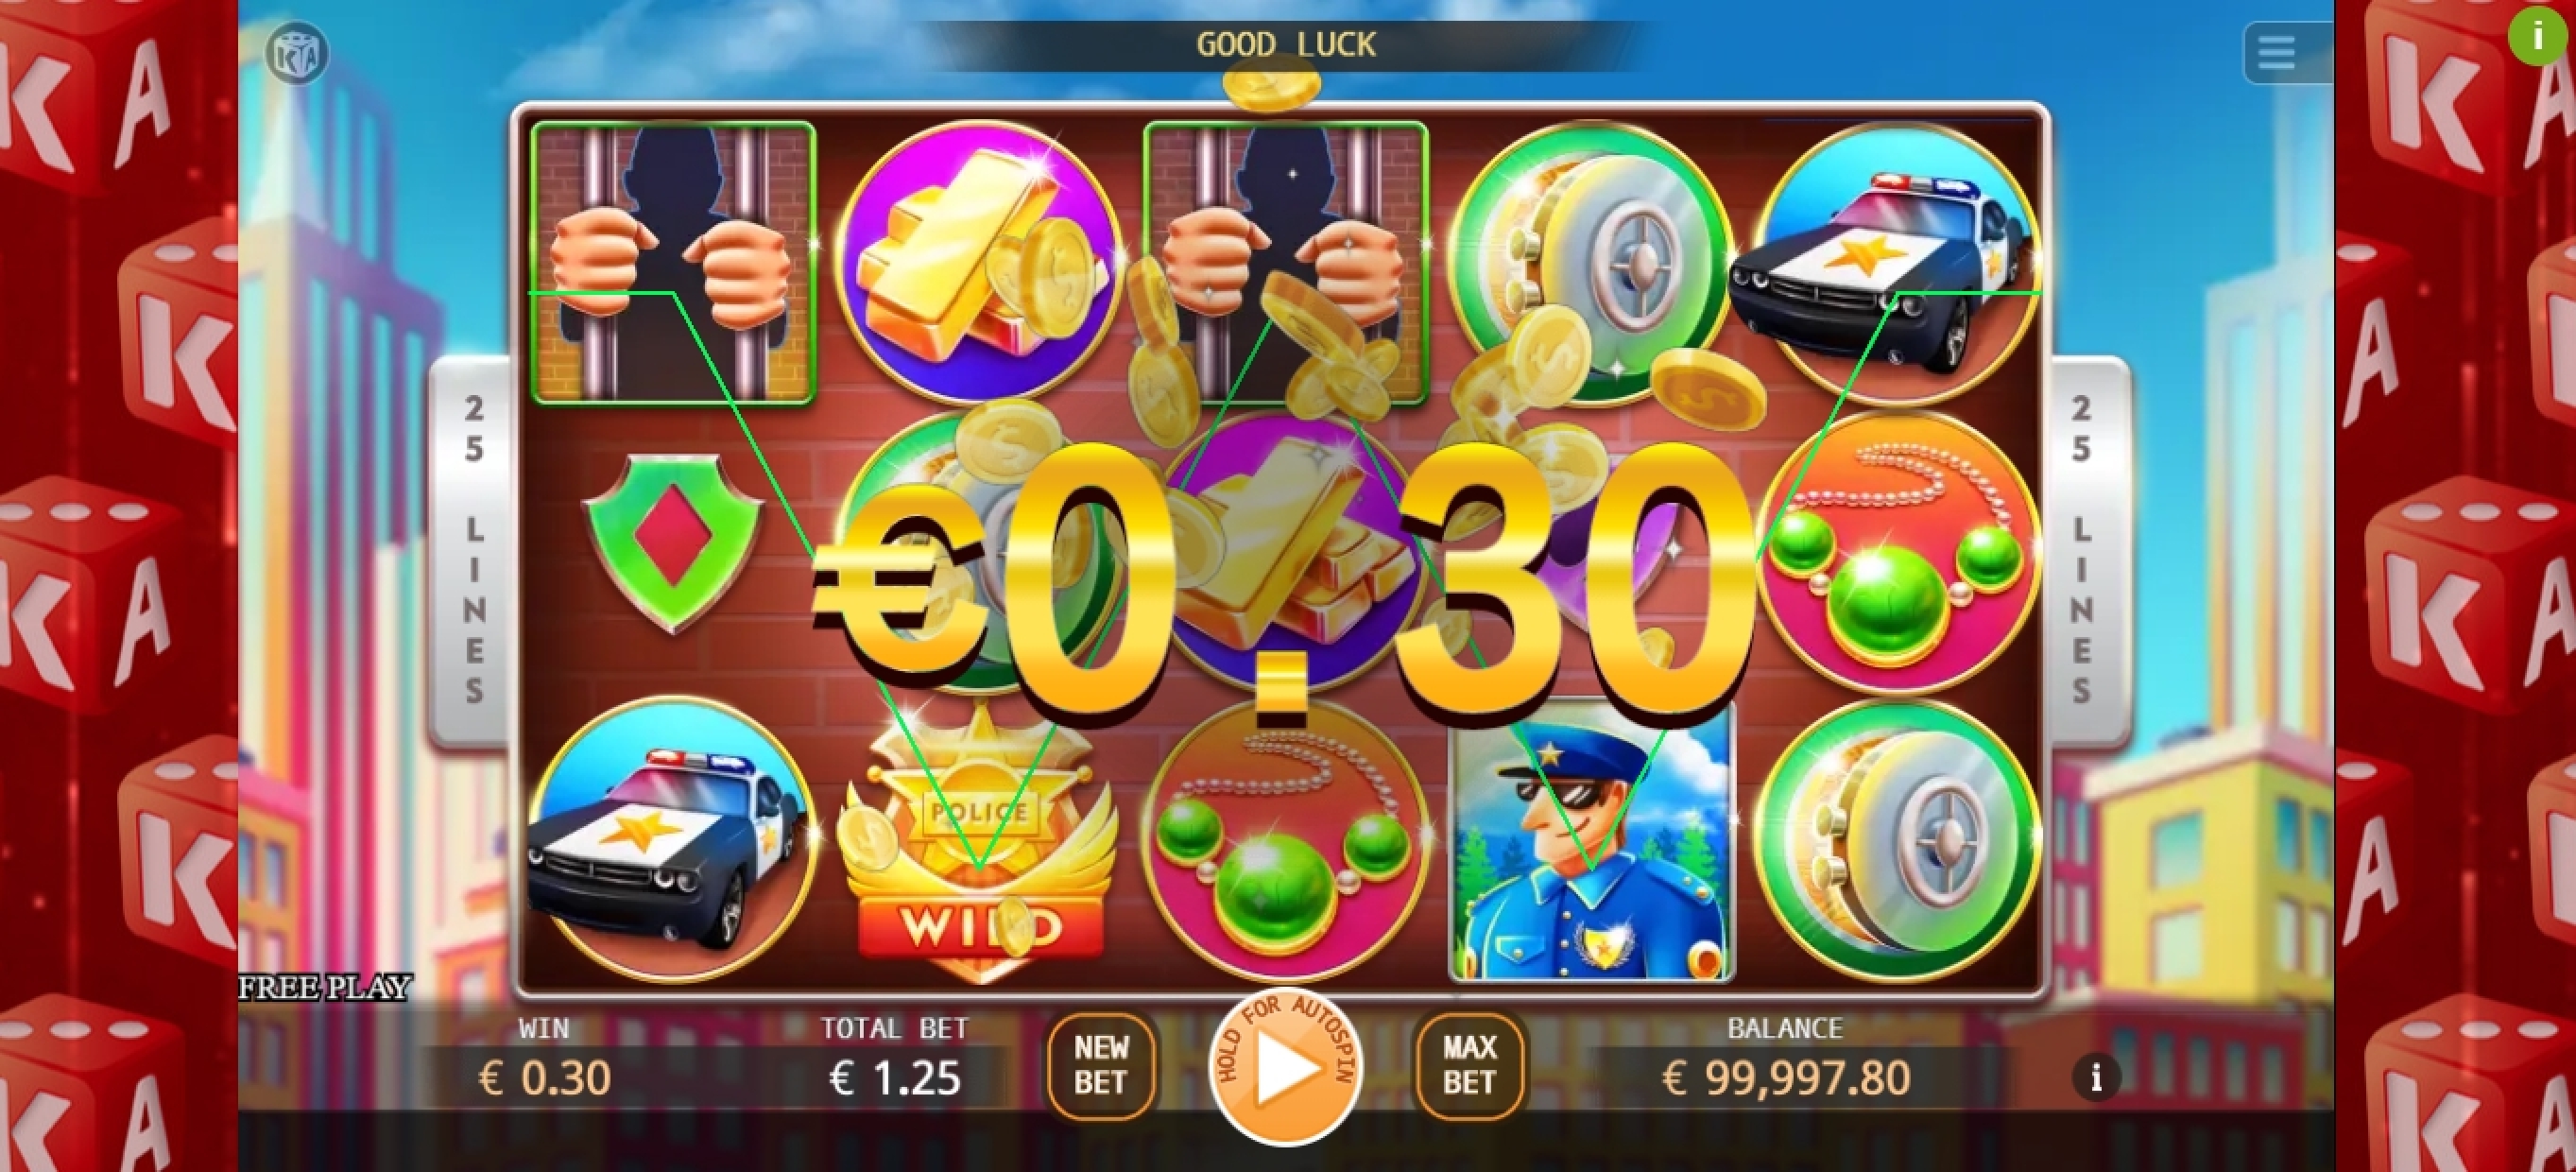 Win Money in Catch the Thief Free Slot Game by KA Gaming